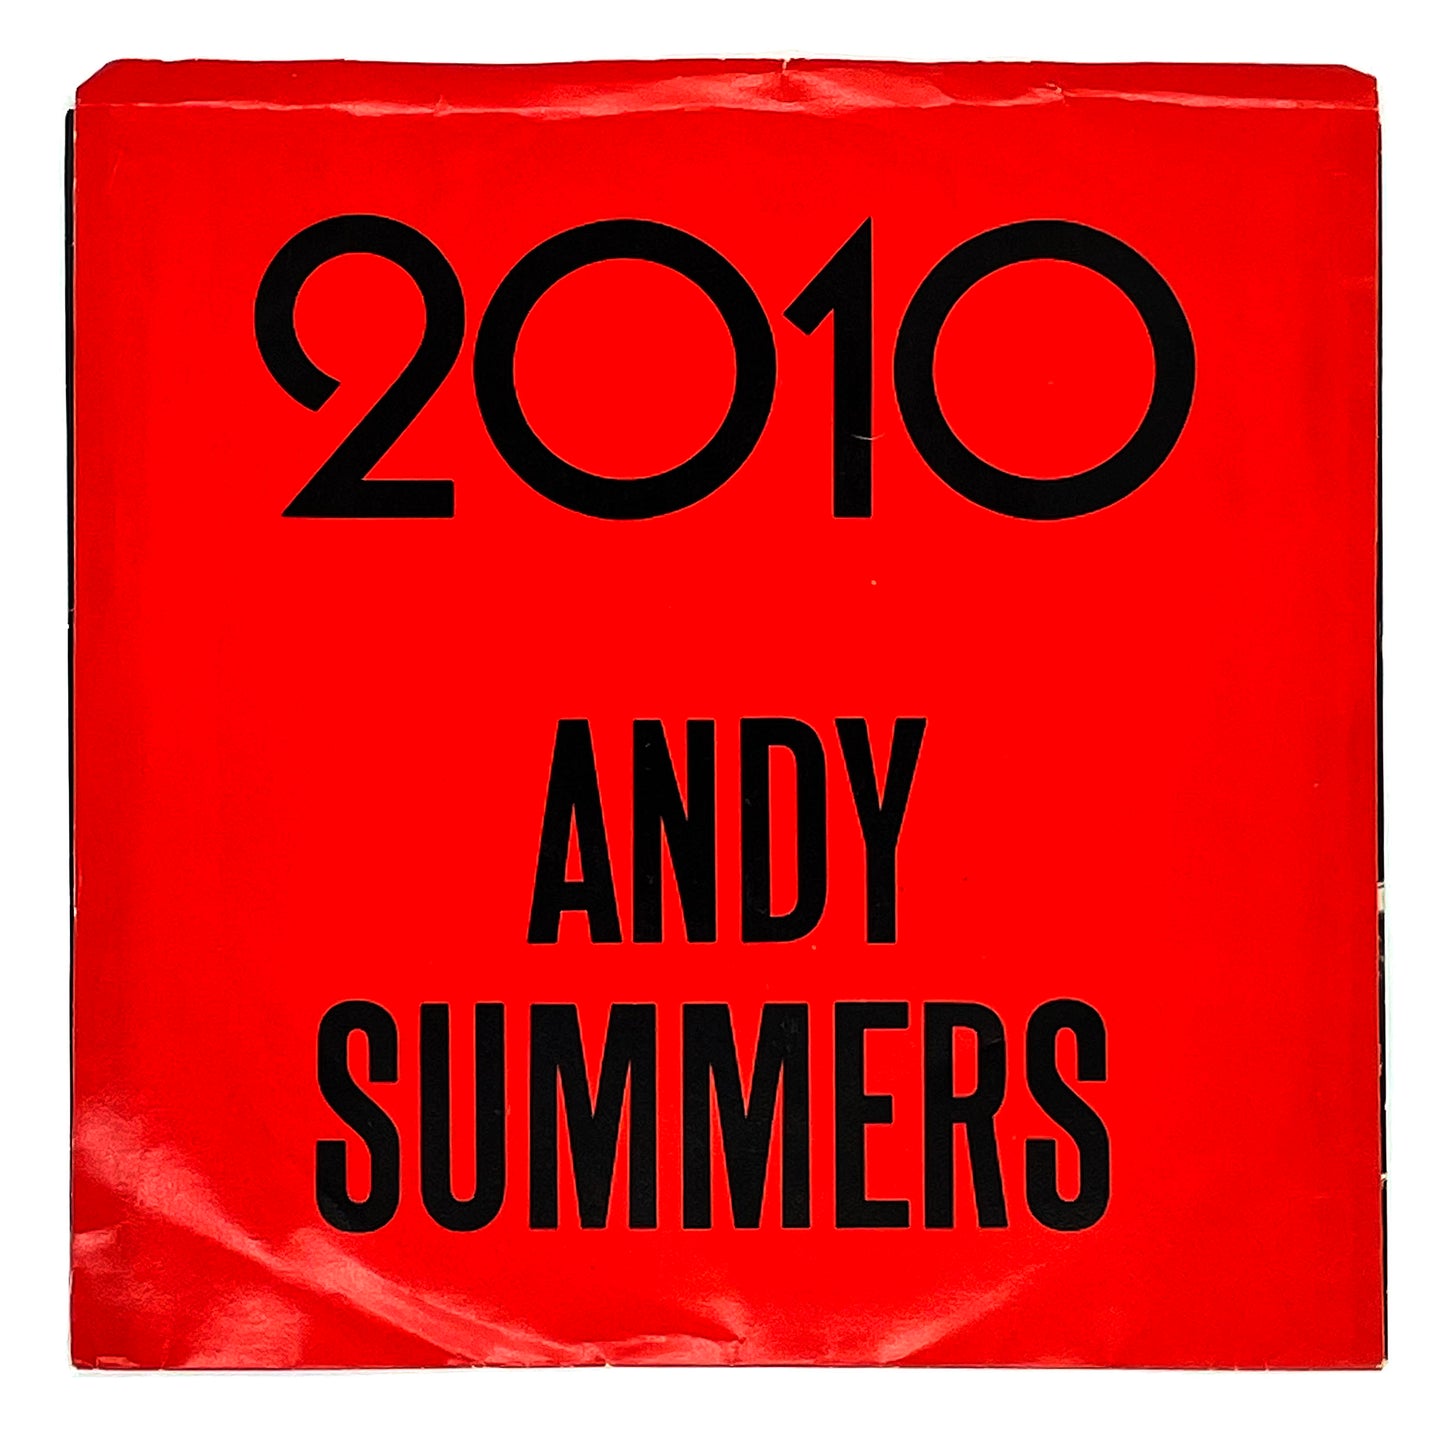 Andy Summers : 2010/ 2010